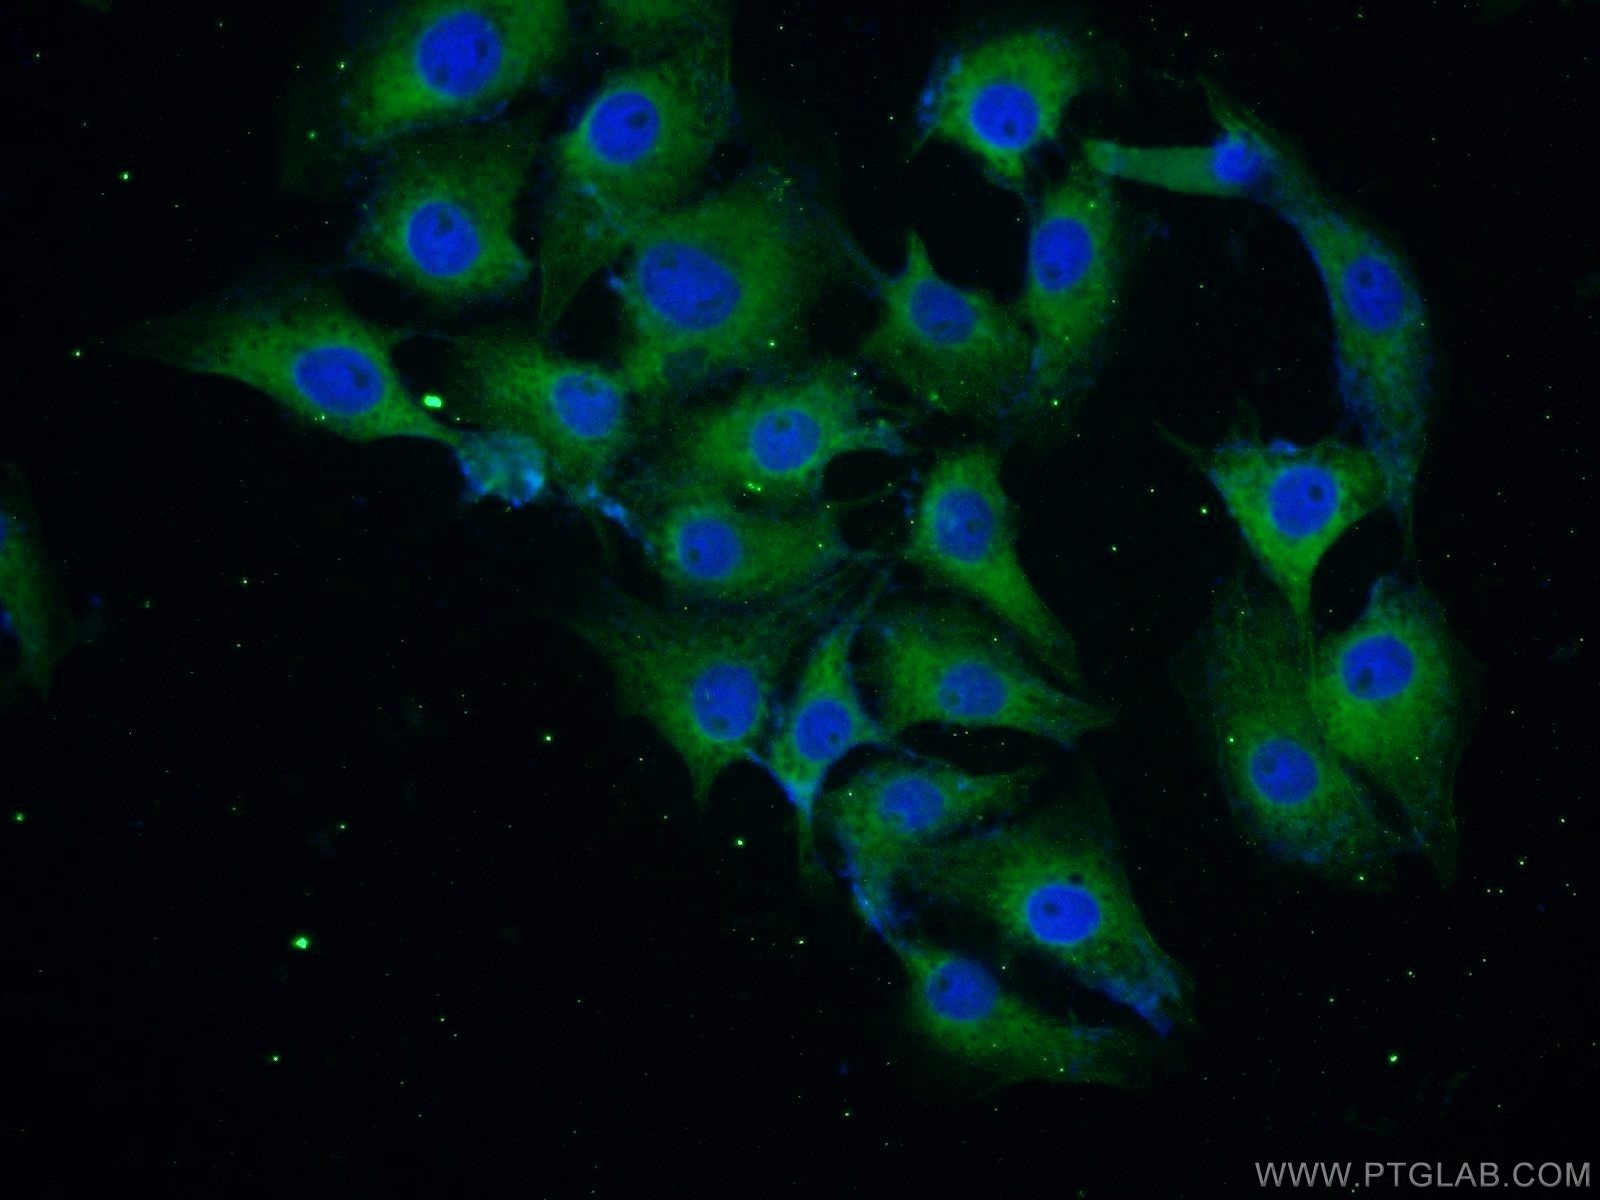 IF analysis of SH-SY5Y cells (human neuroblastoma) labeling Alpha-Synuclein with 10842-1-AP Proteintech antibody at a dilution of 1:25. Alexa Fluor 488-congugated AffiniPure Goat Anti-Rabbit IgG (H+L) was used as the secondary antibody and DAPI was used as the nuclear counterstain